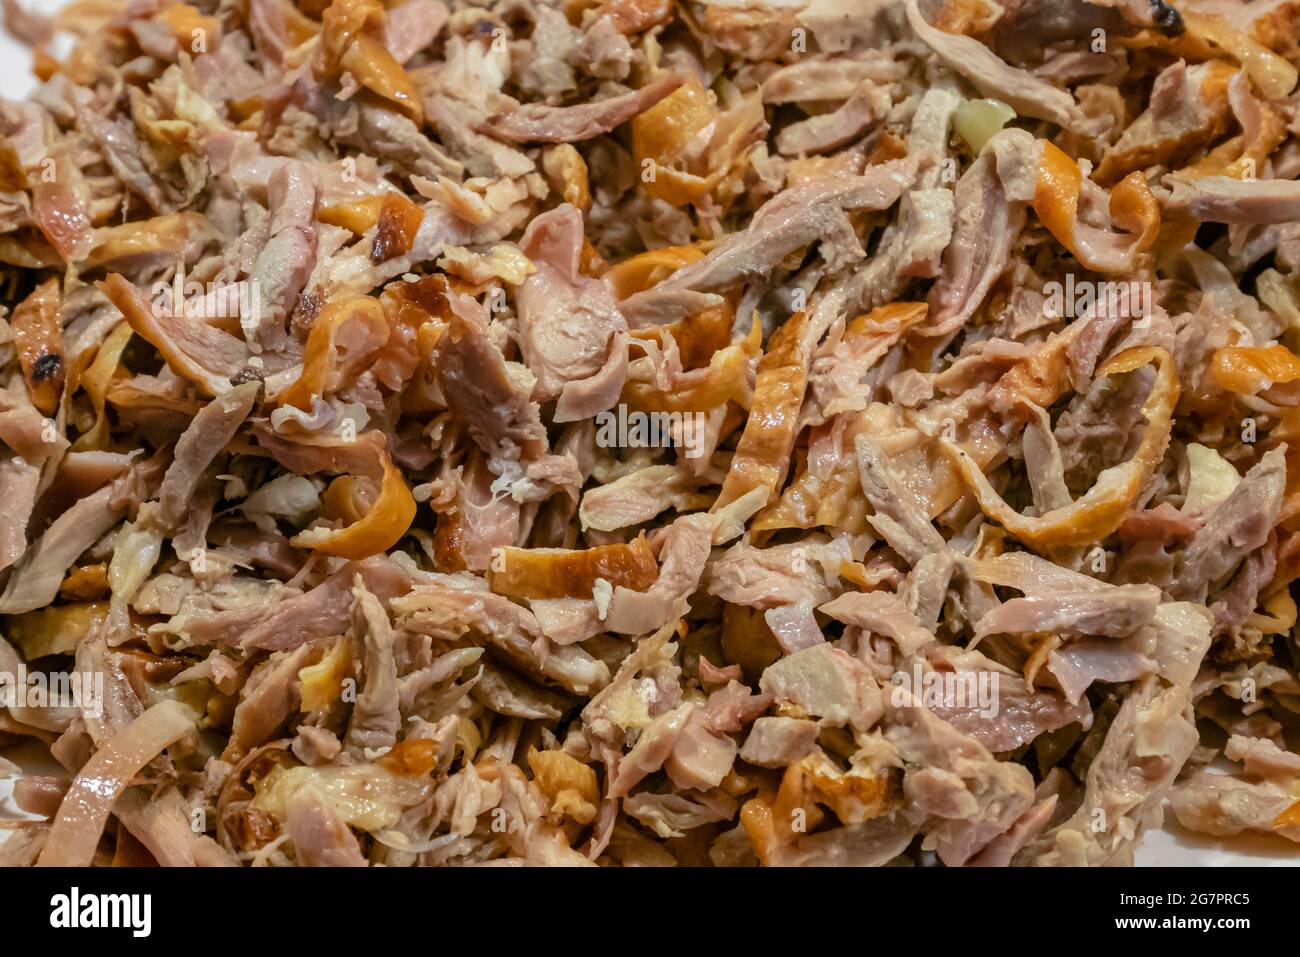 Roast duck, a close up of Taiwanese traditional sliced roasted duck food at Taiwan night market. Stock Photo